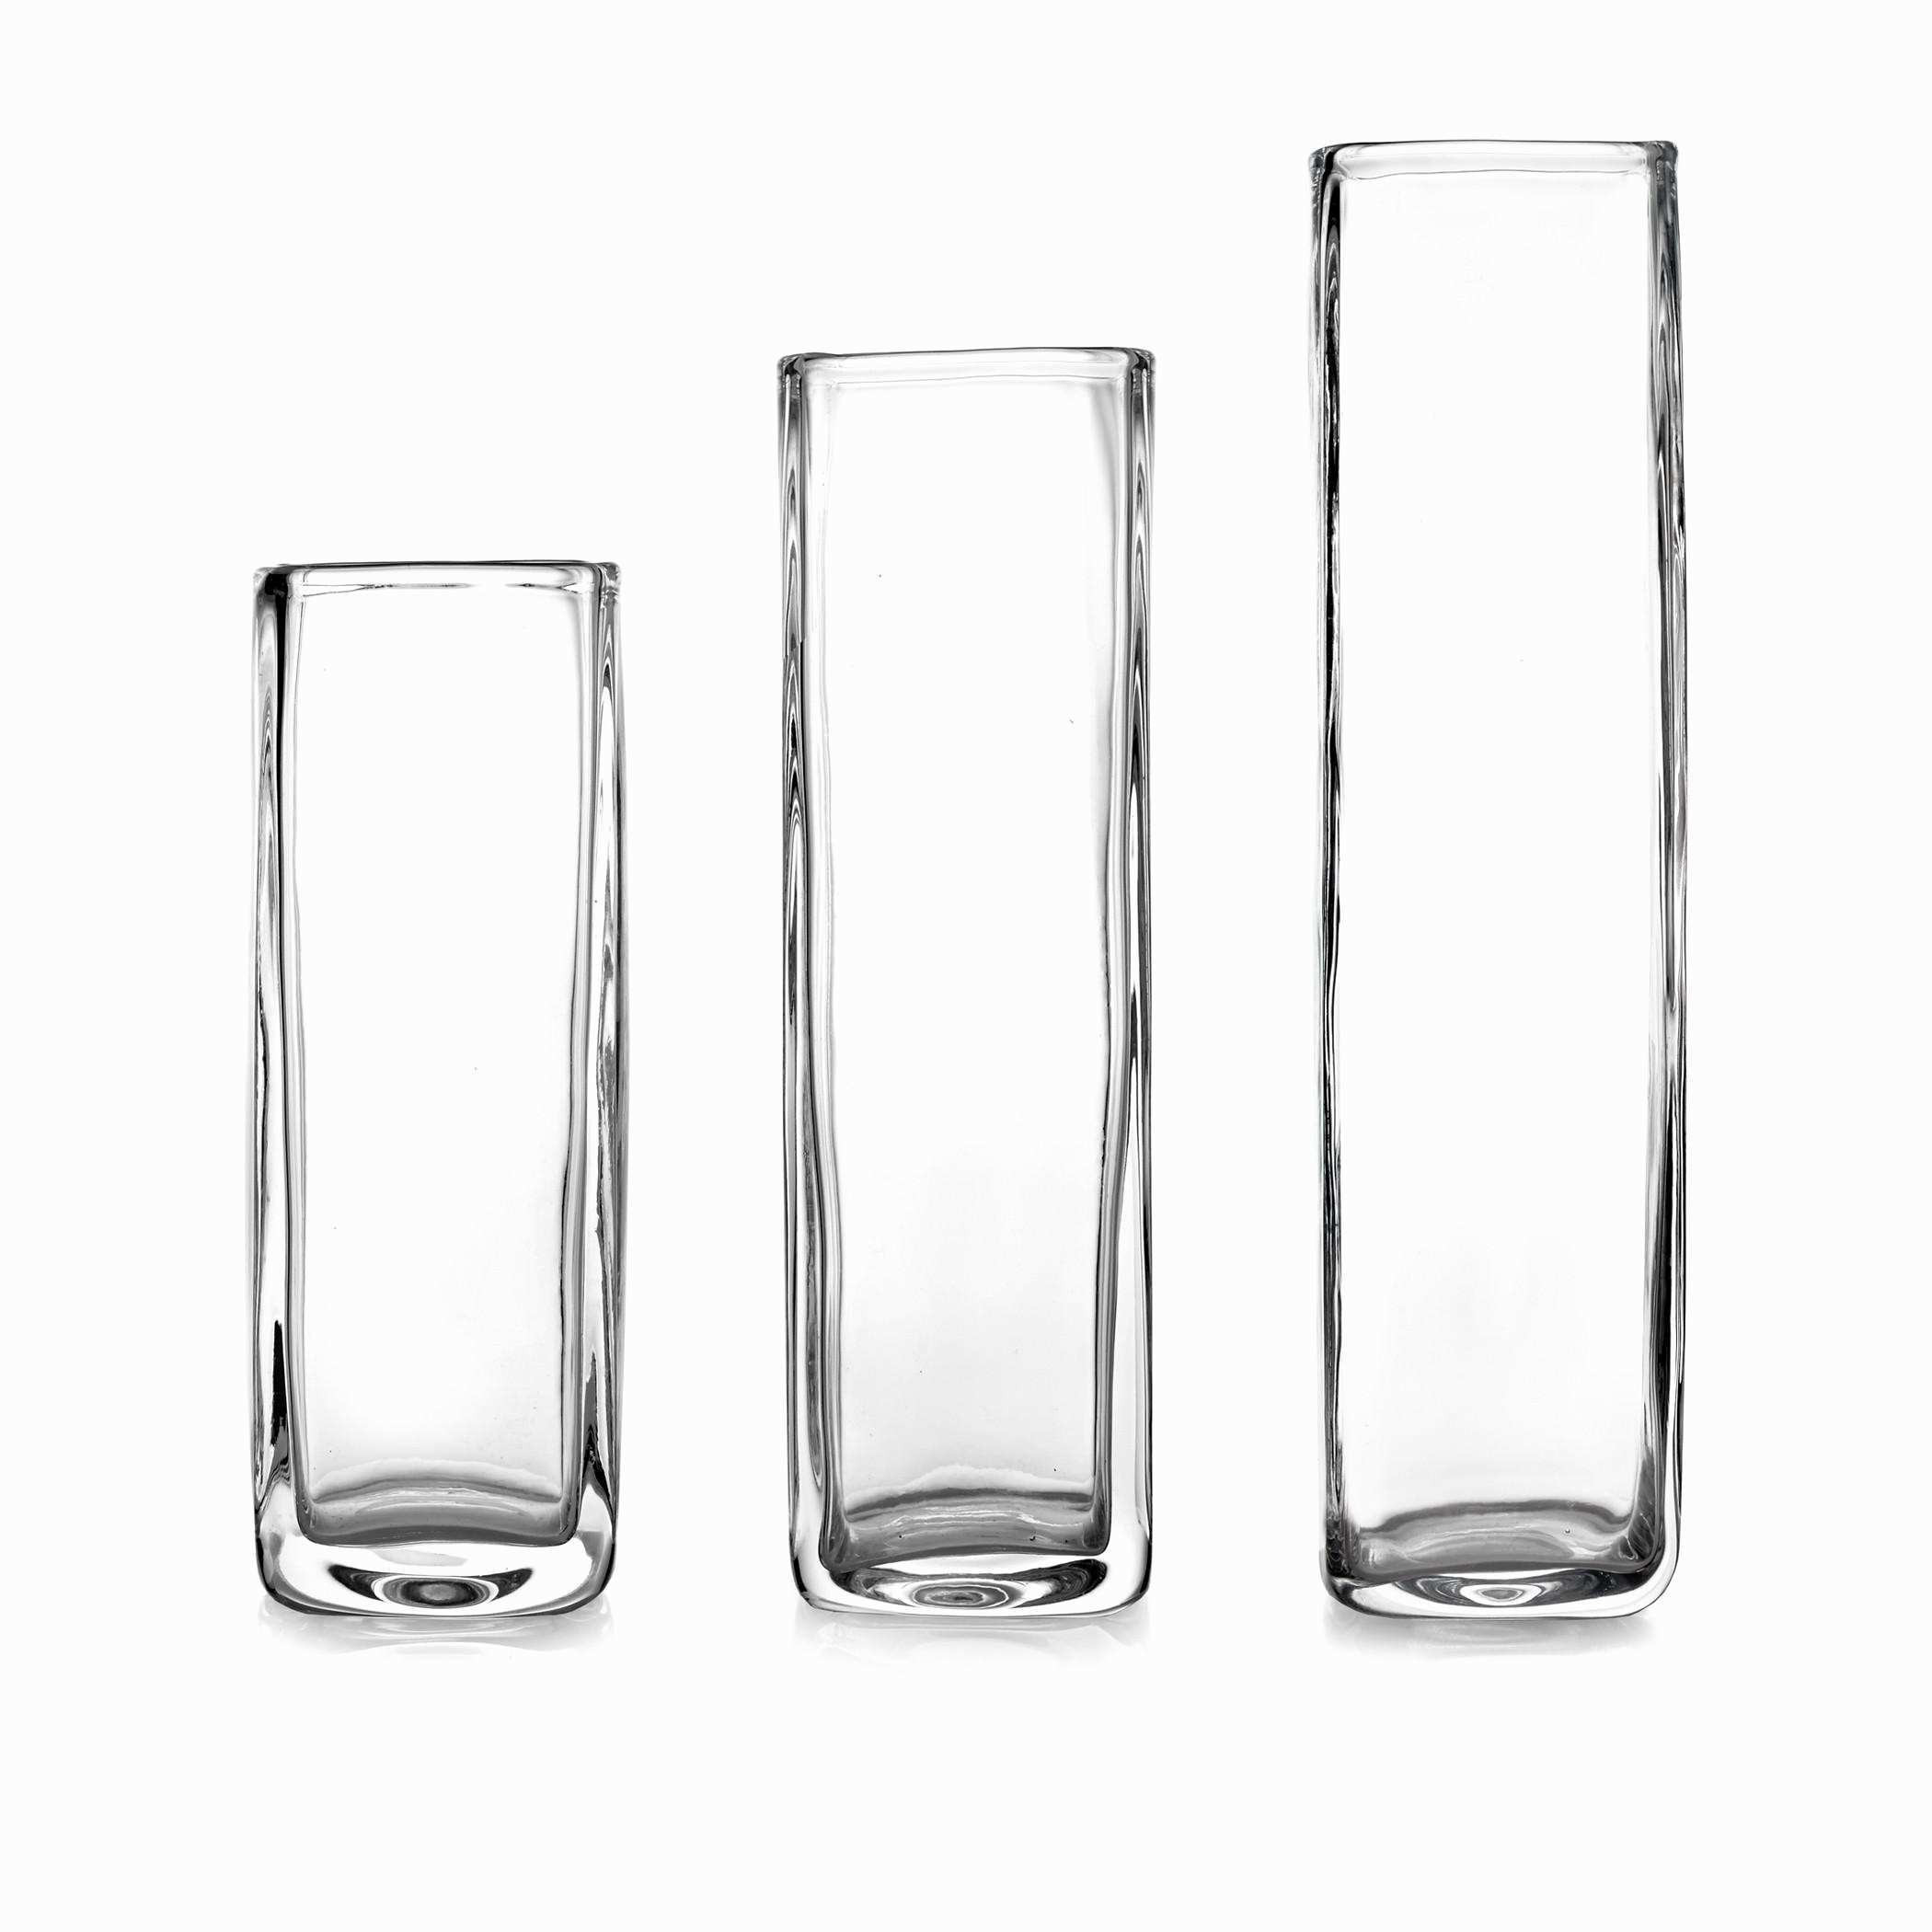 14 Unique Cheap Tall Skinny Glass Vases 2024 free download cheap tall skinny glass vases of glass cylinder centerpieces photograph tall vase centerpiece ideas regarding glass cylinder centerpieces gallery glass wedding centerpieces inspirational liv